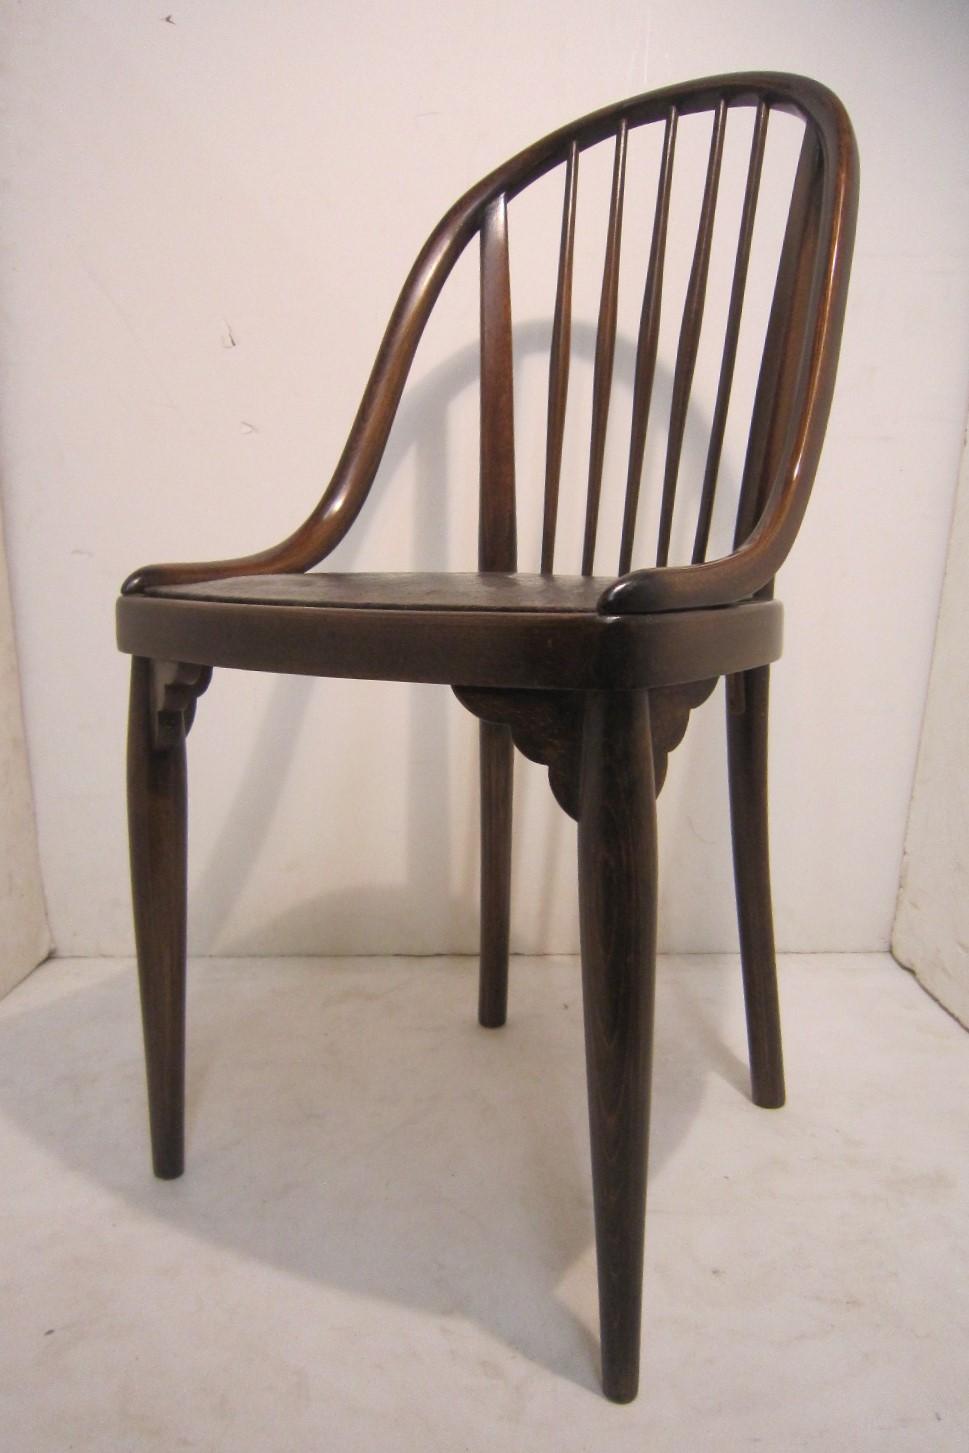 Vienna Secession Set of Four Original Beechwood Chairs by Thonet